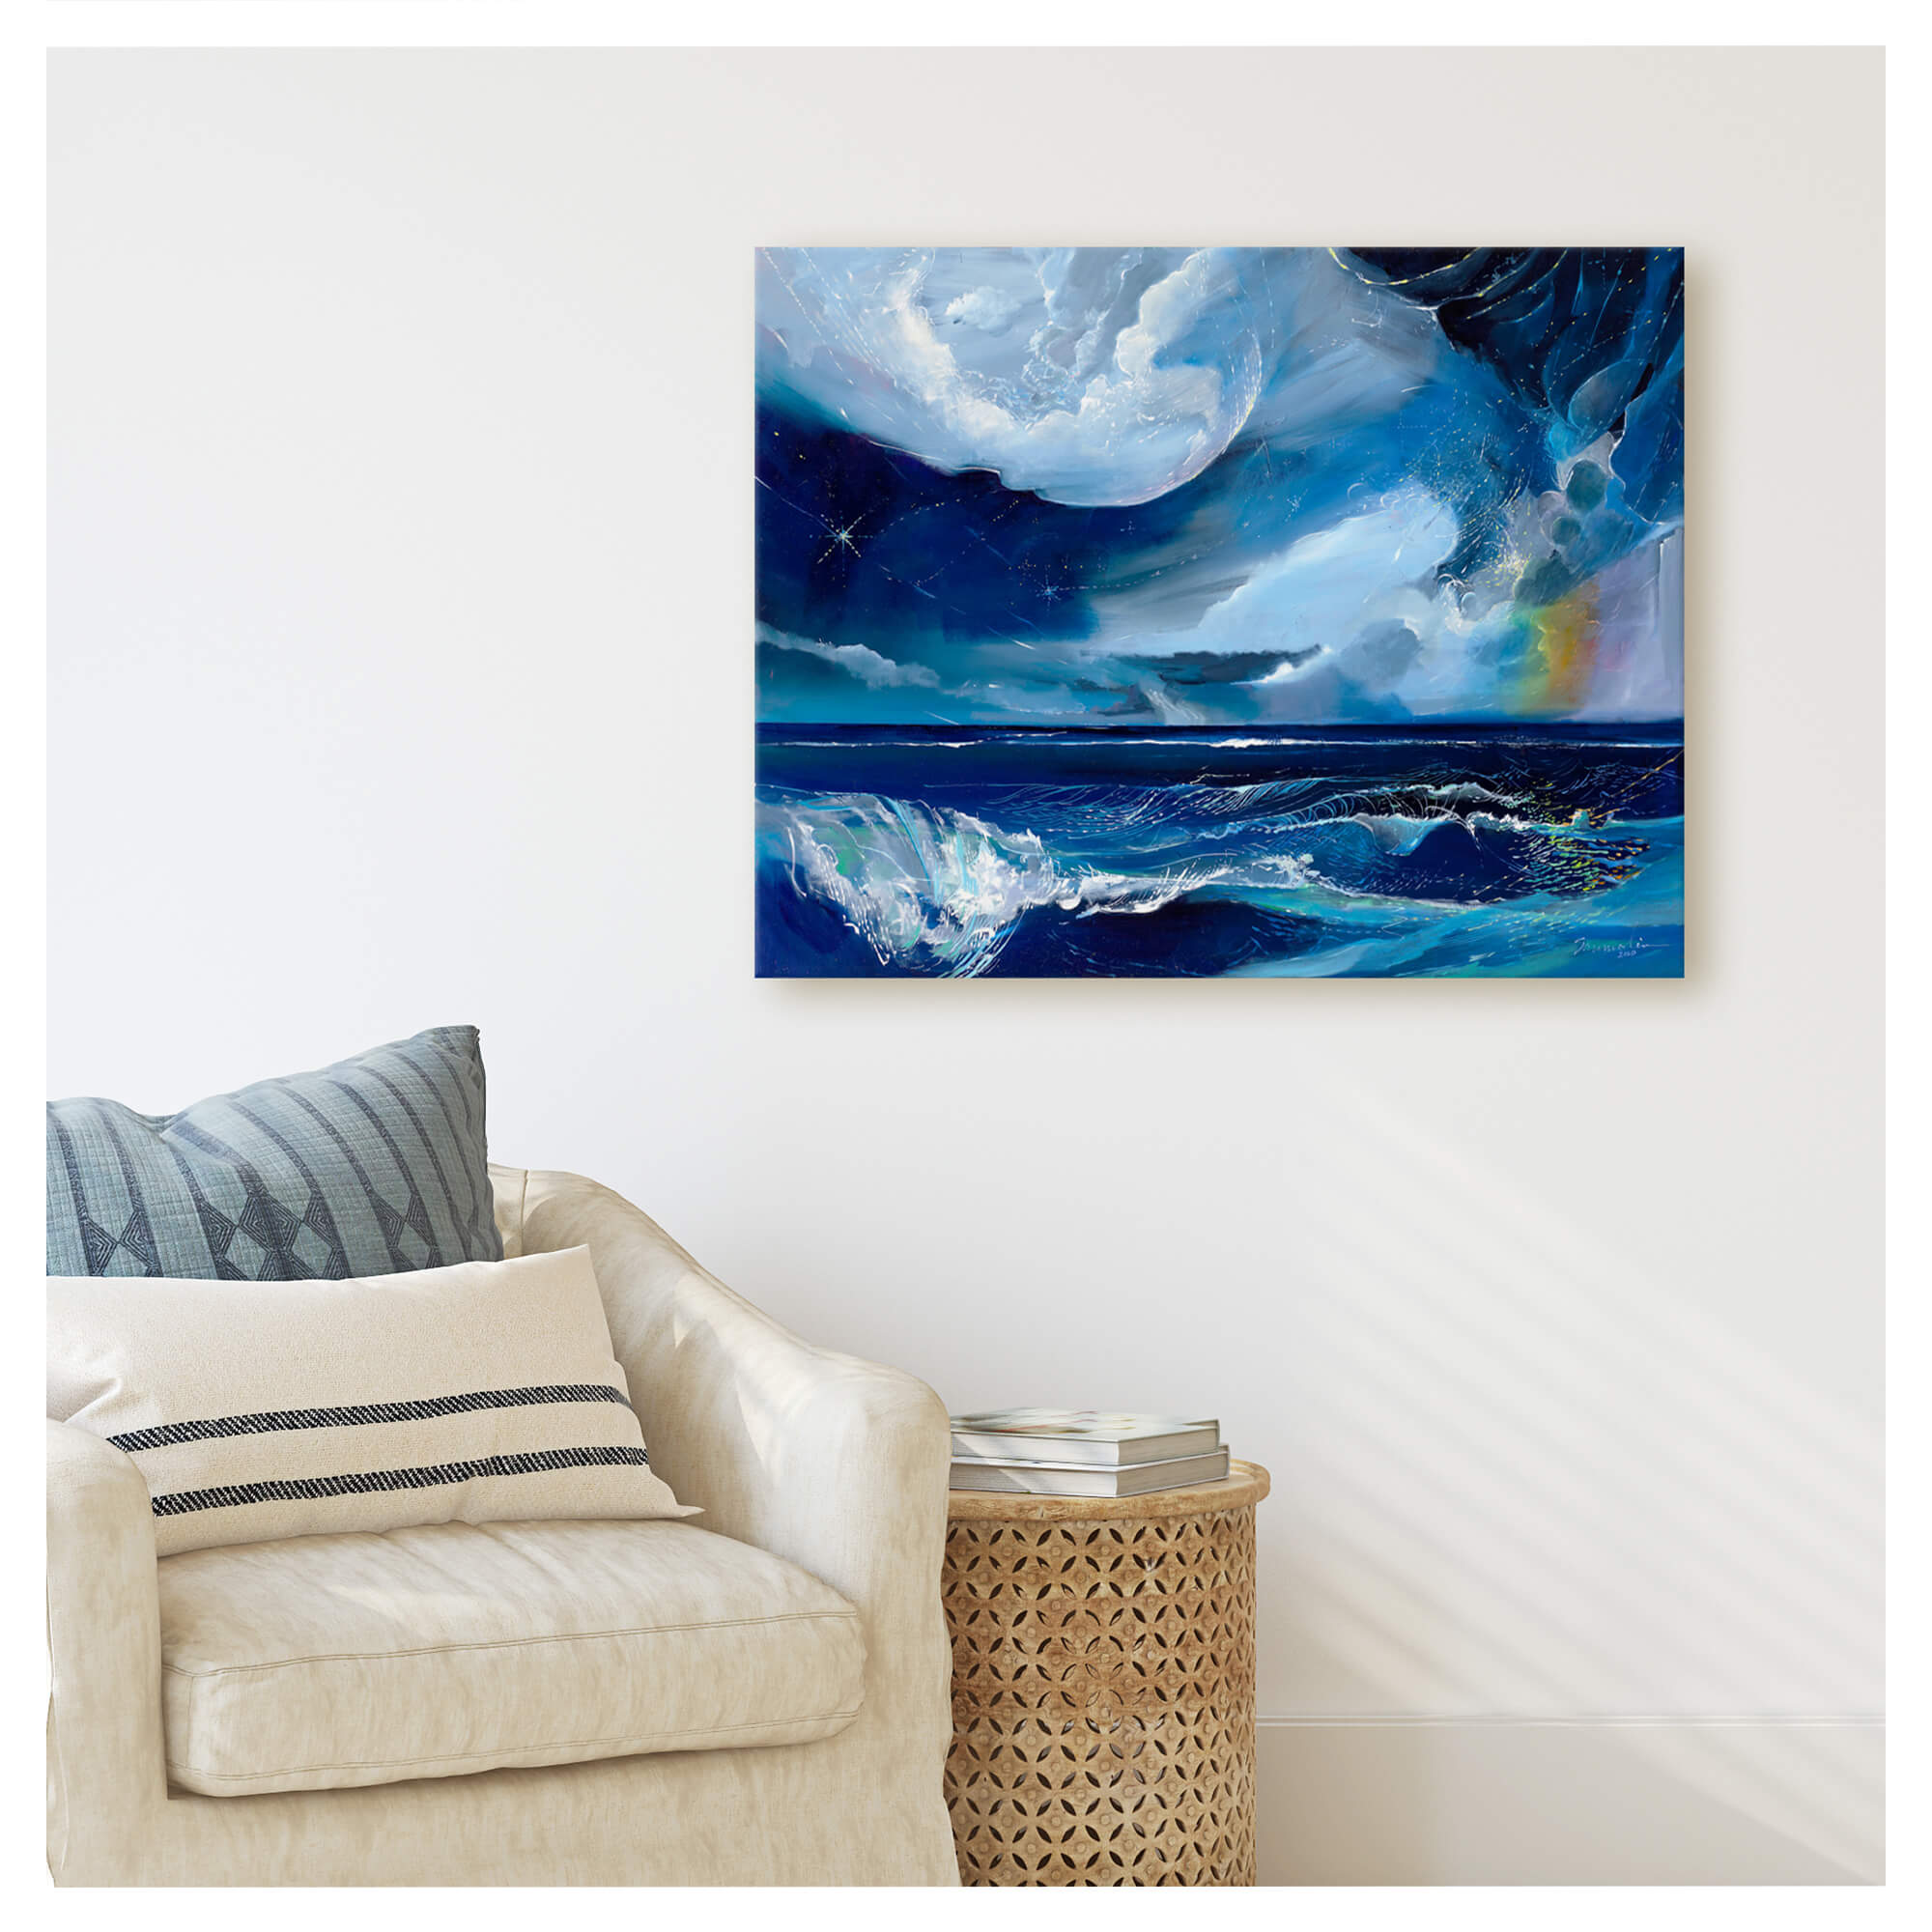 Abstract evening seascape painting and a rainbow by Hawaii artist Saumolia Puapuaga 